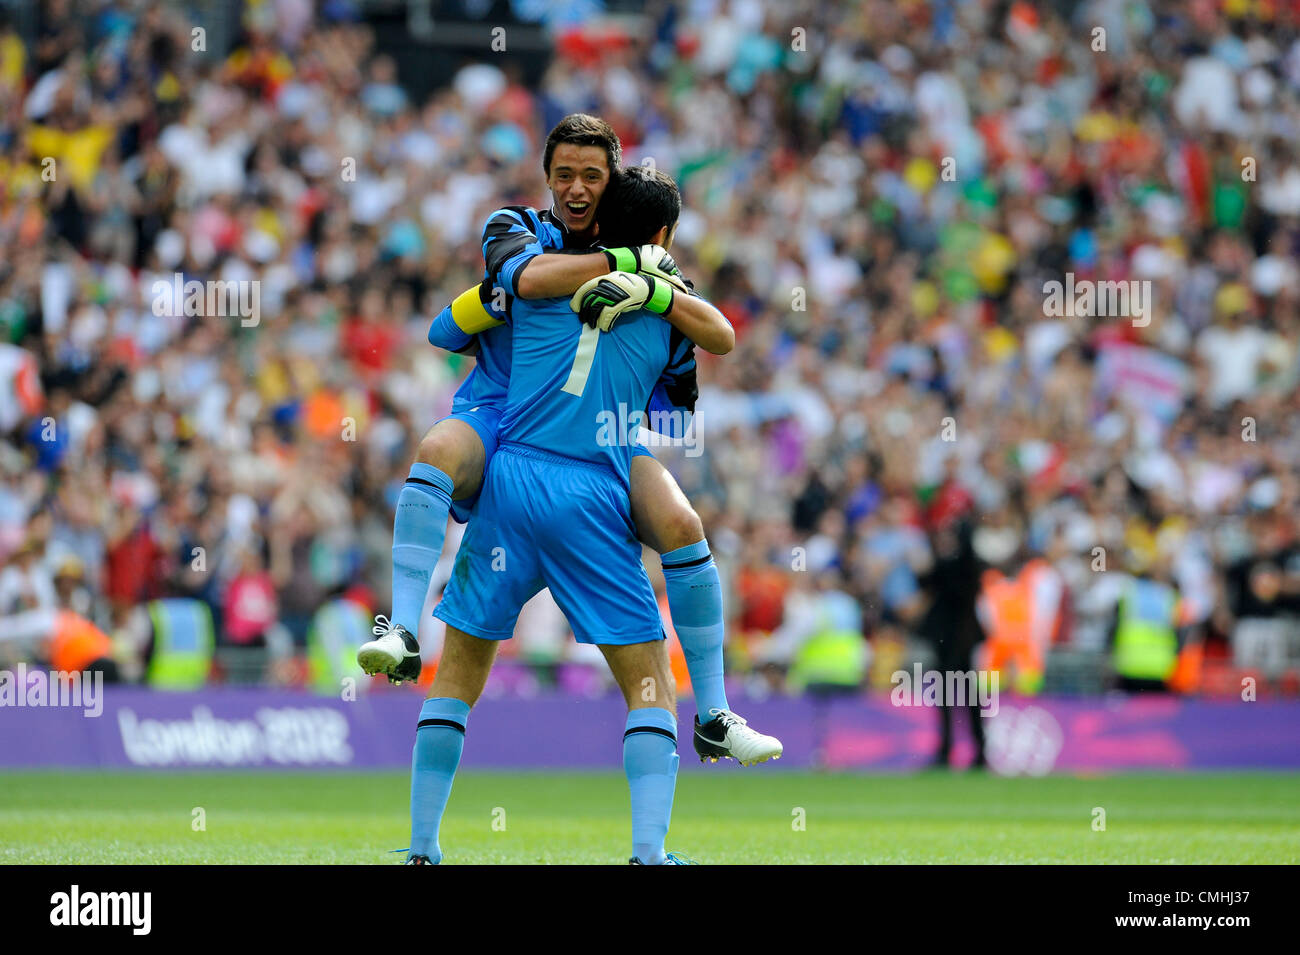 11.08.2012 London, England. Mexico's Jose Corona (GoalKeeper) and Mexico's Antonia Rodriguez (GoalKeeper)  in action during the Olympic Men's Final  between Brazil  and Mexico from Wembley Stadium. Stock Photo